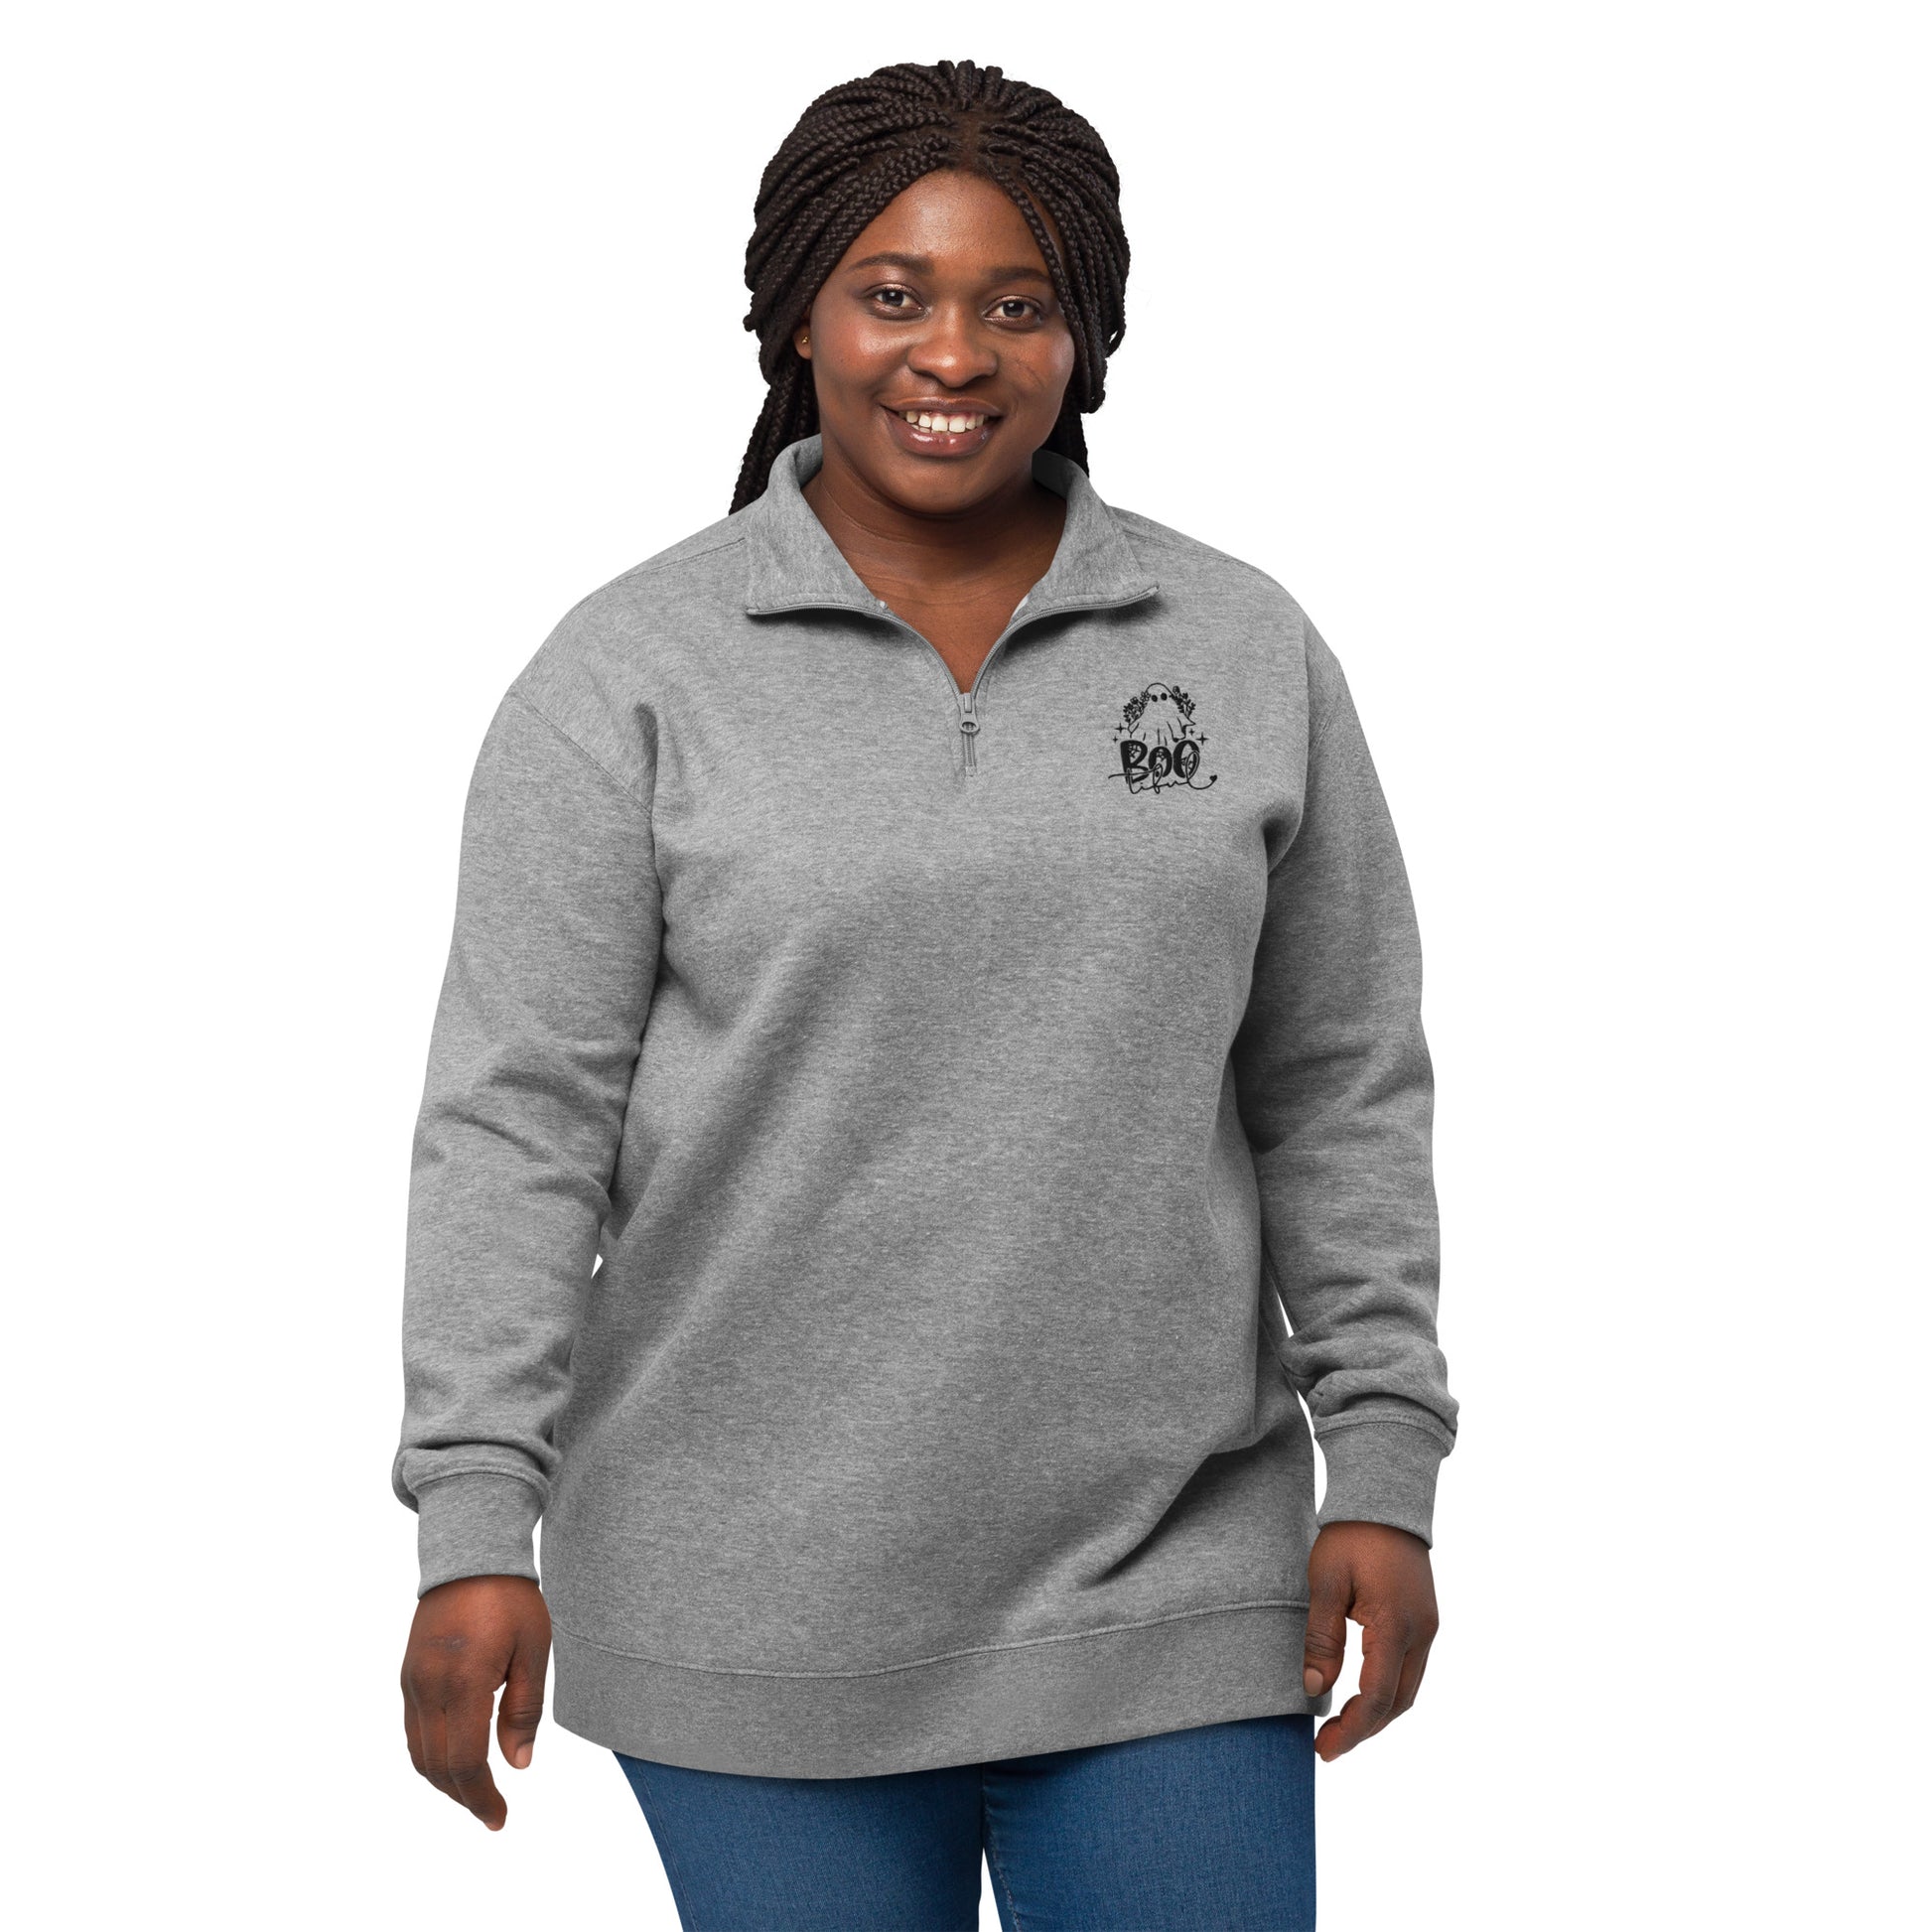 Bootiful Embroidered Unisex fleece pullover CedarHill Country Market